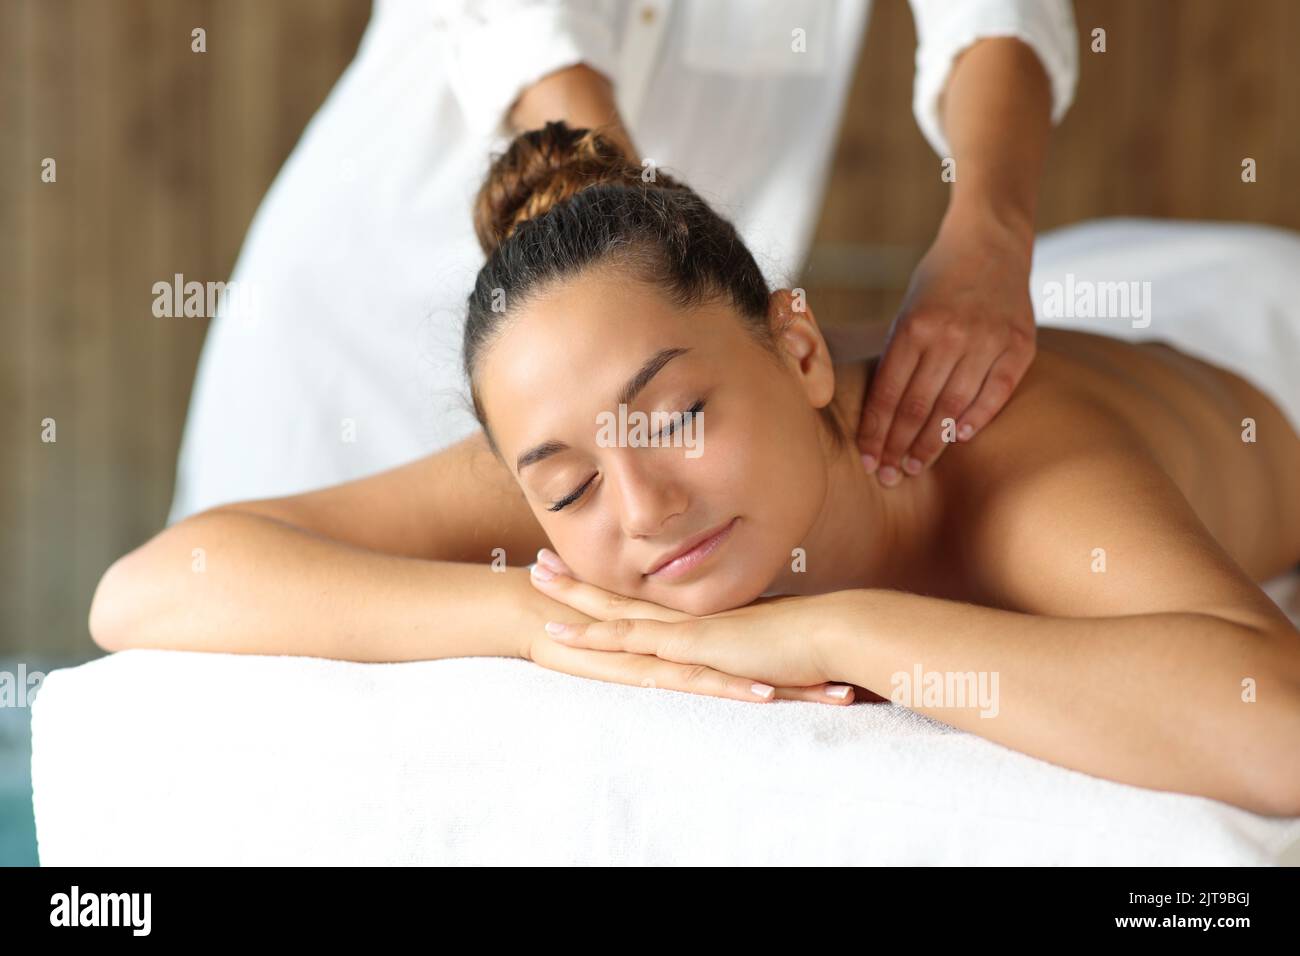 Massage therapist working with a happy client in a spa Stock Photo